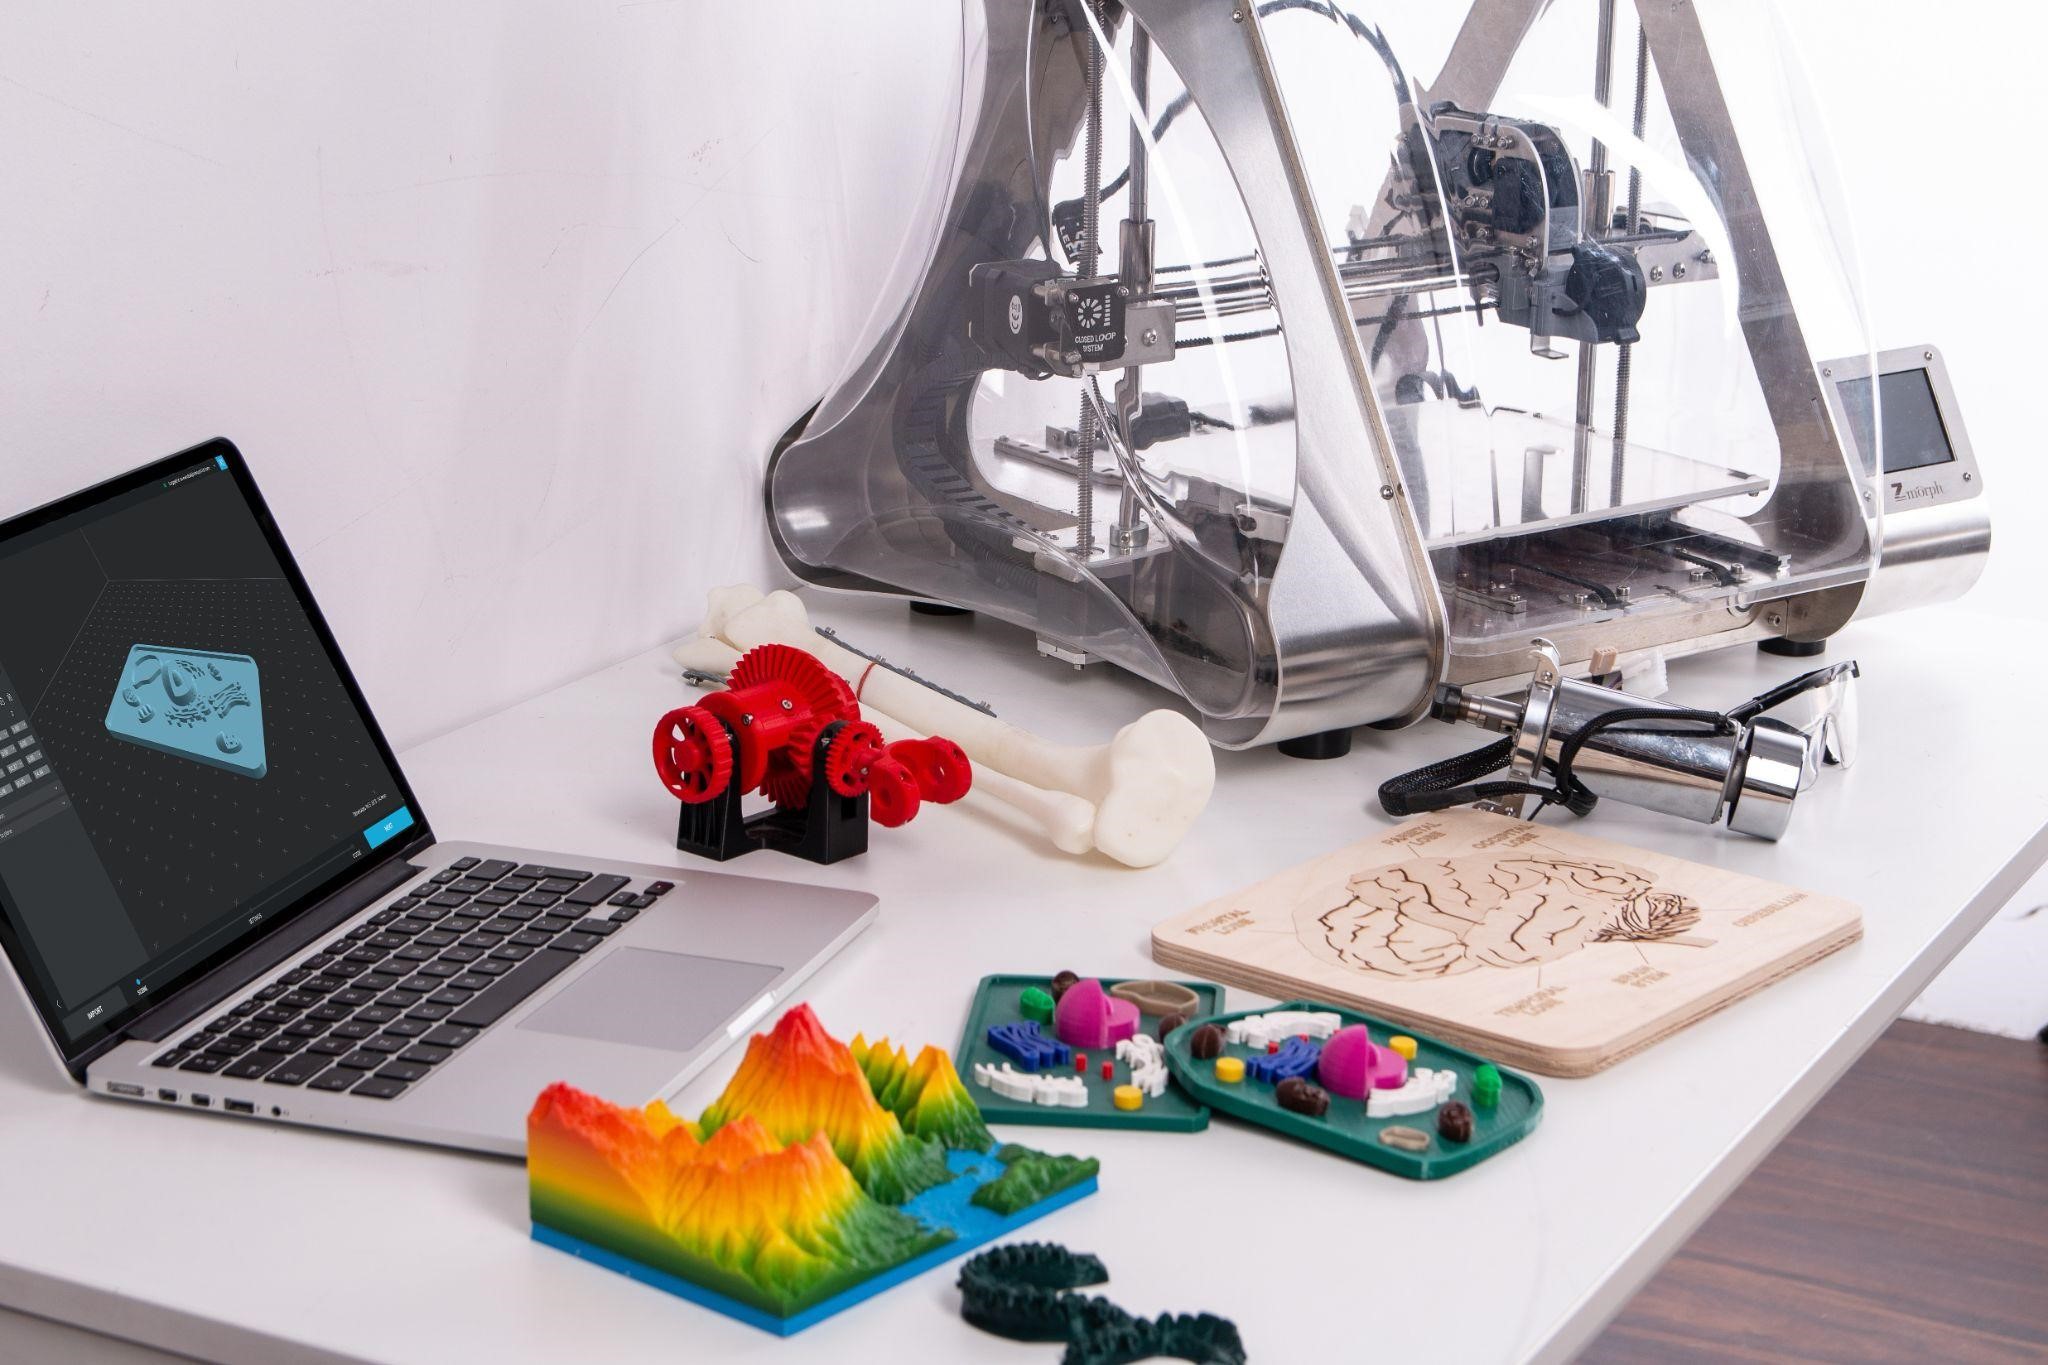 How Does 3D Printing Impact Architecture?